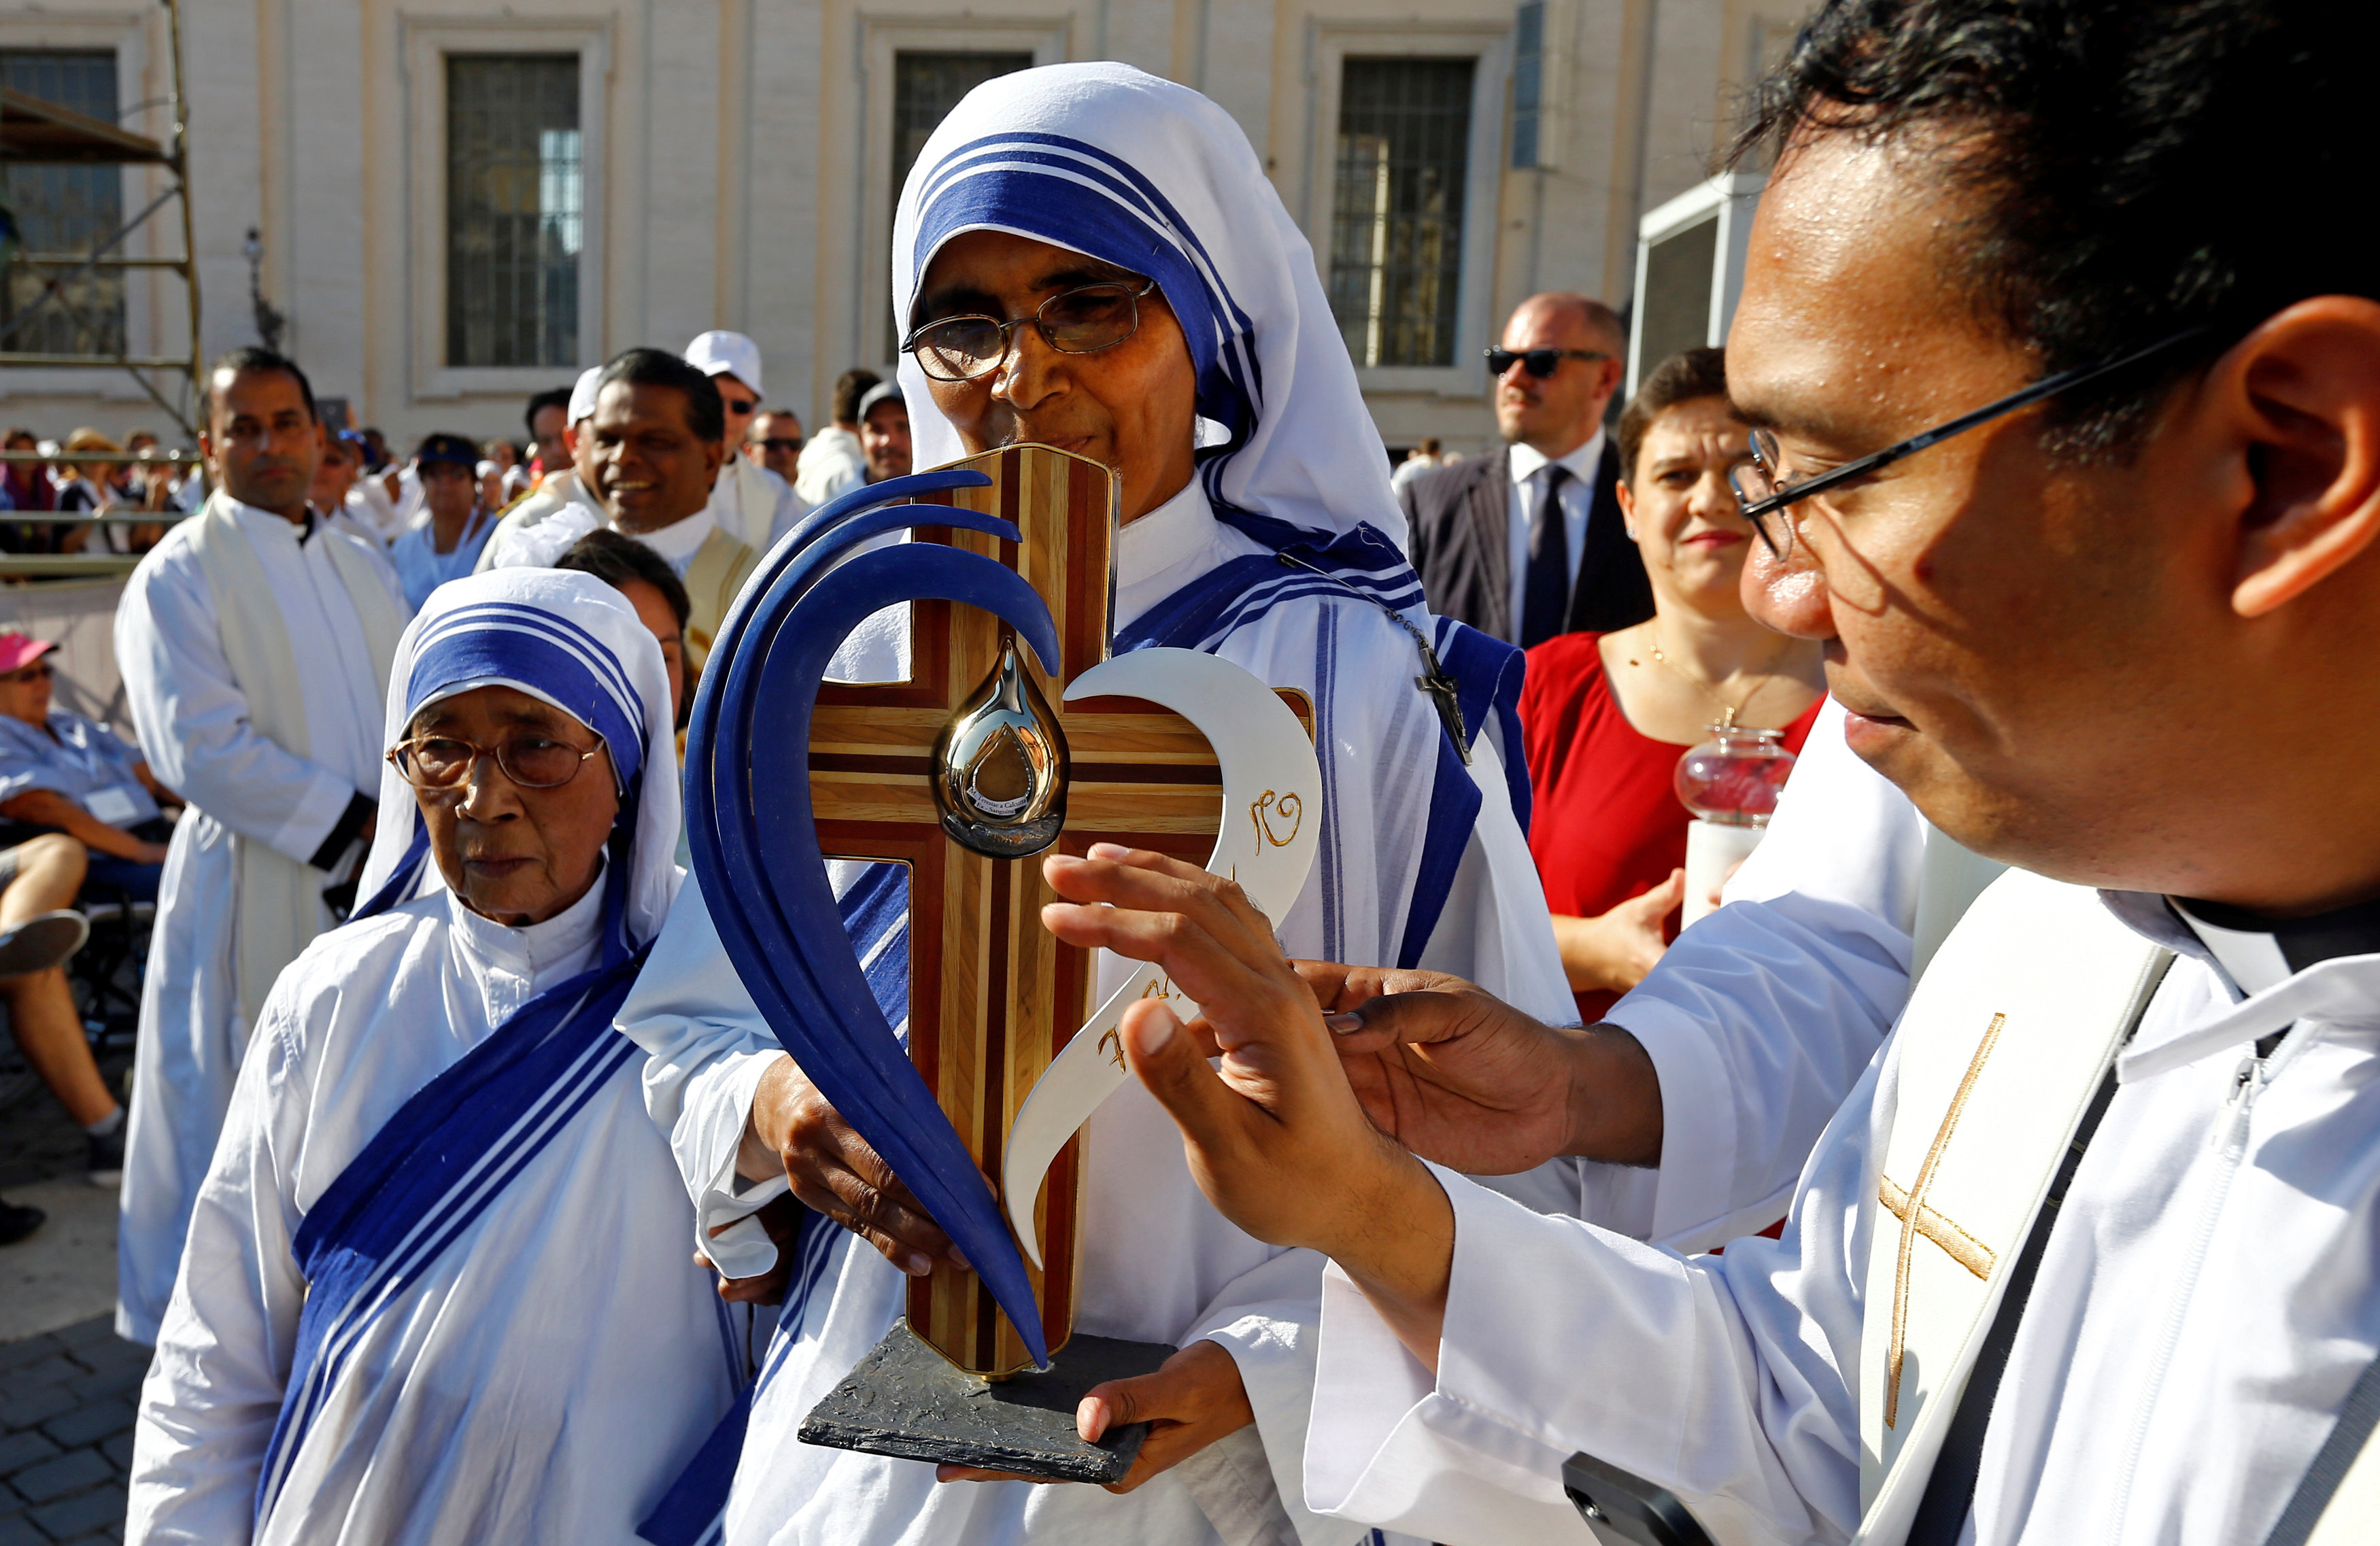 Crowds flock to Vatican for Mother Teresa sainthood ceremony